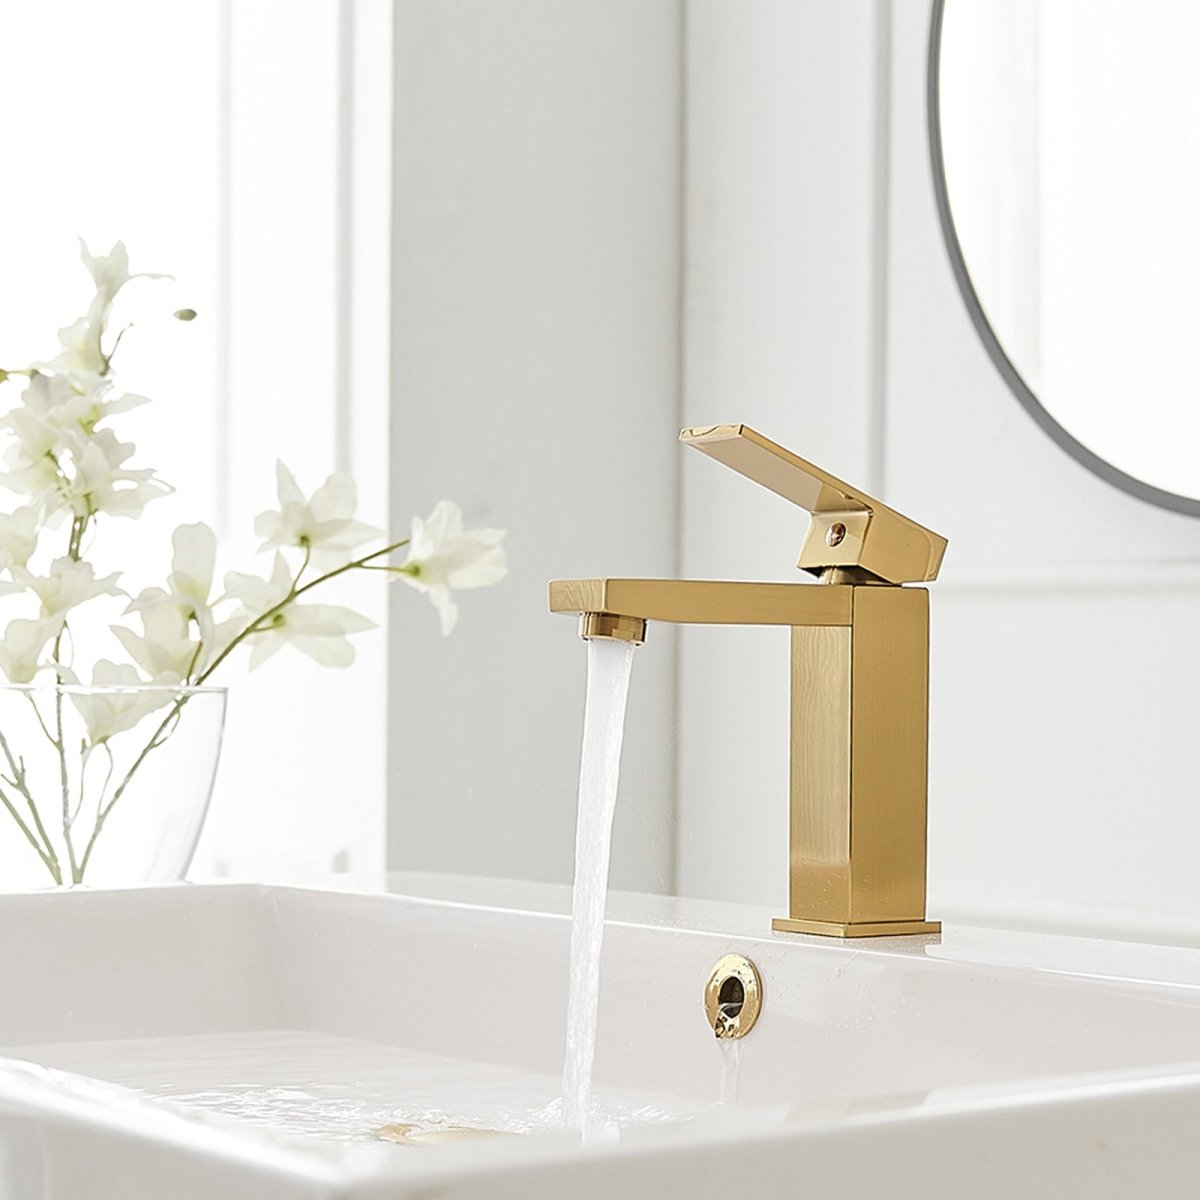 Single Hole Single-Handle Bathroom Faucet in Brushed Gold - buyfaucet.com